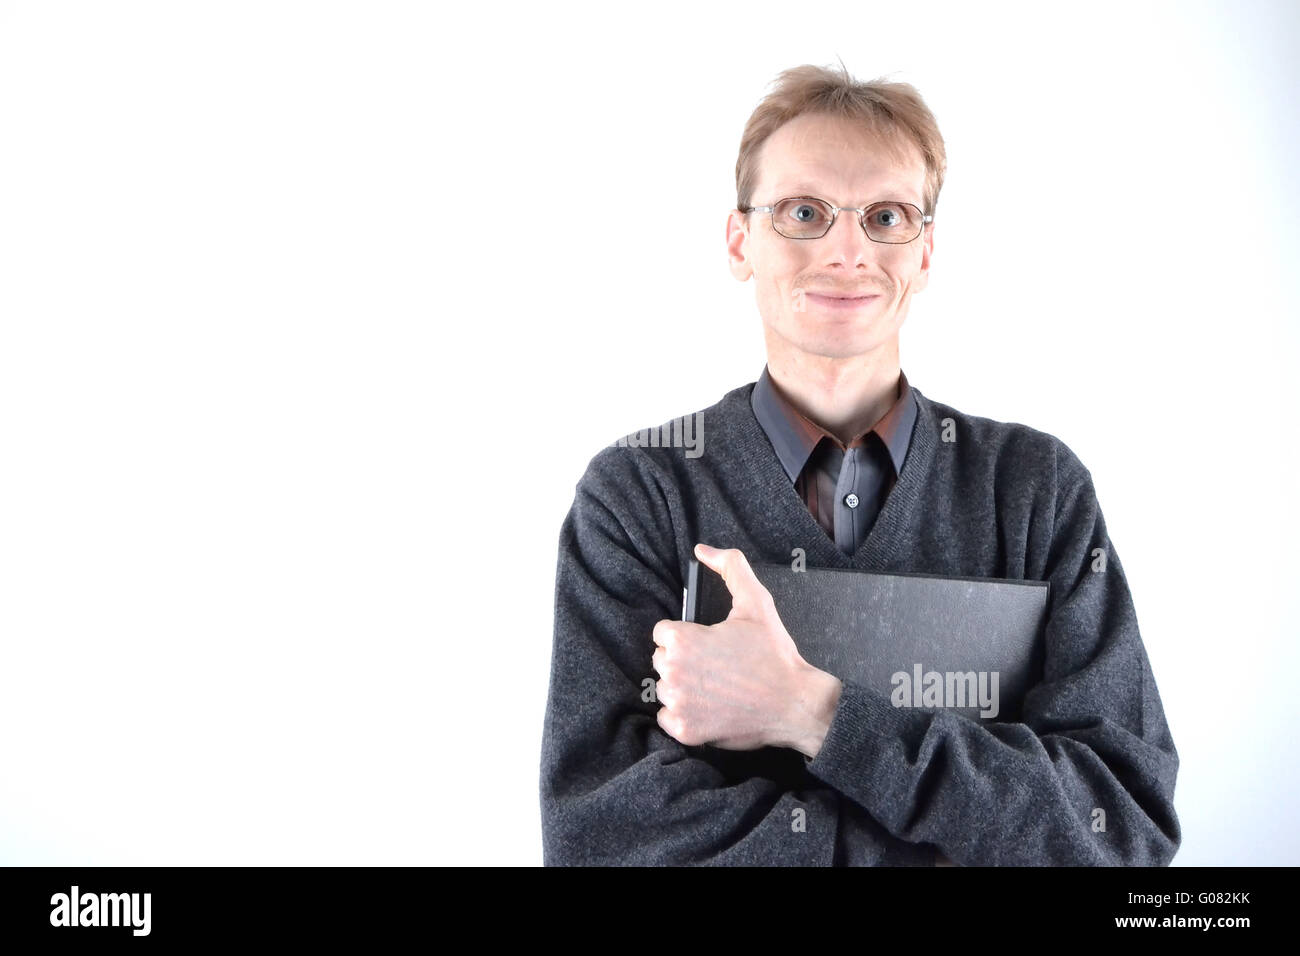 Blond man with glasses and file folders Stock Photo